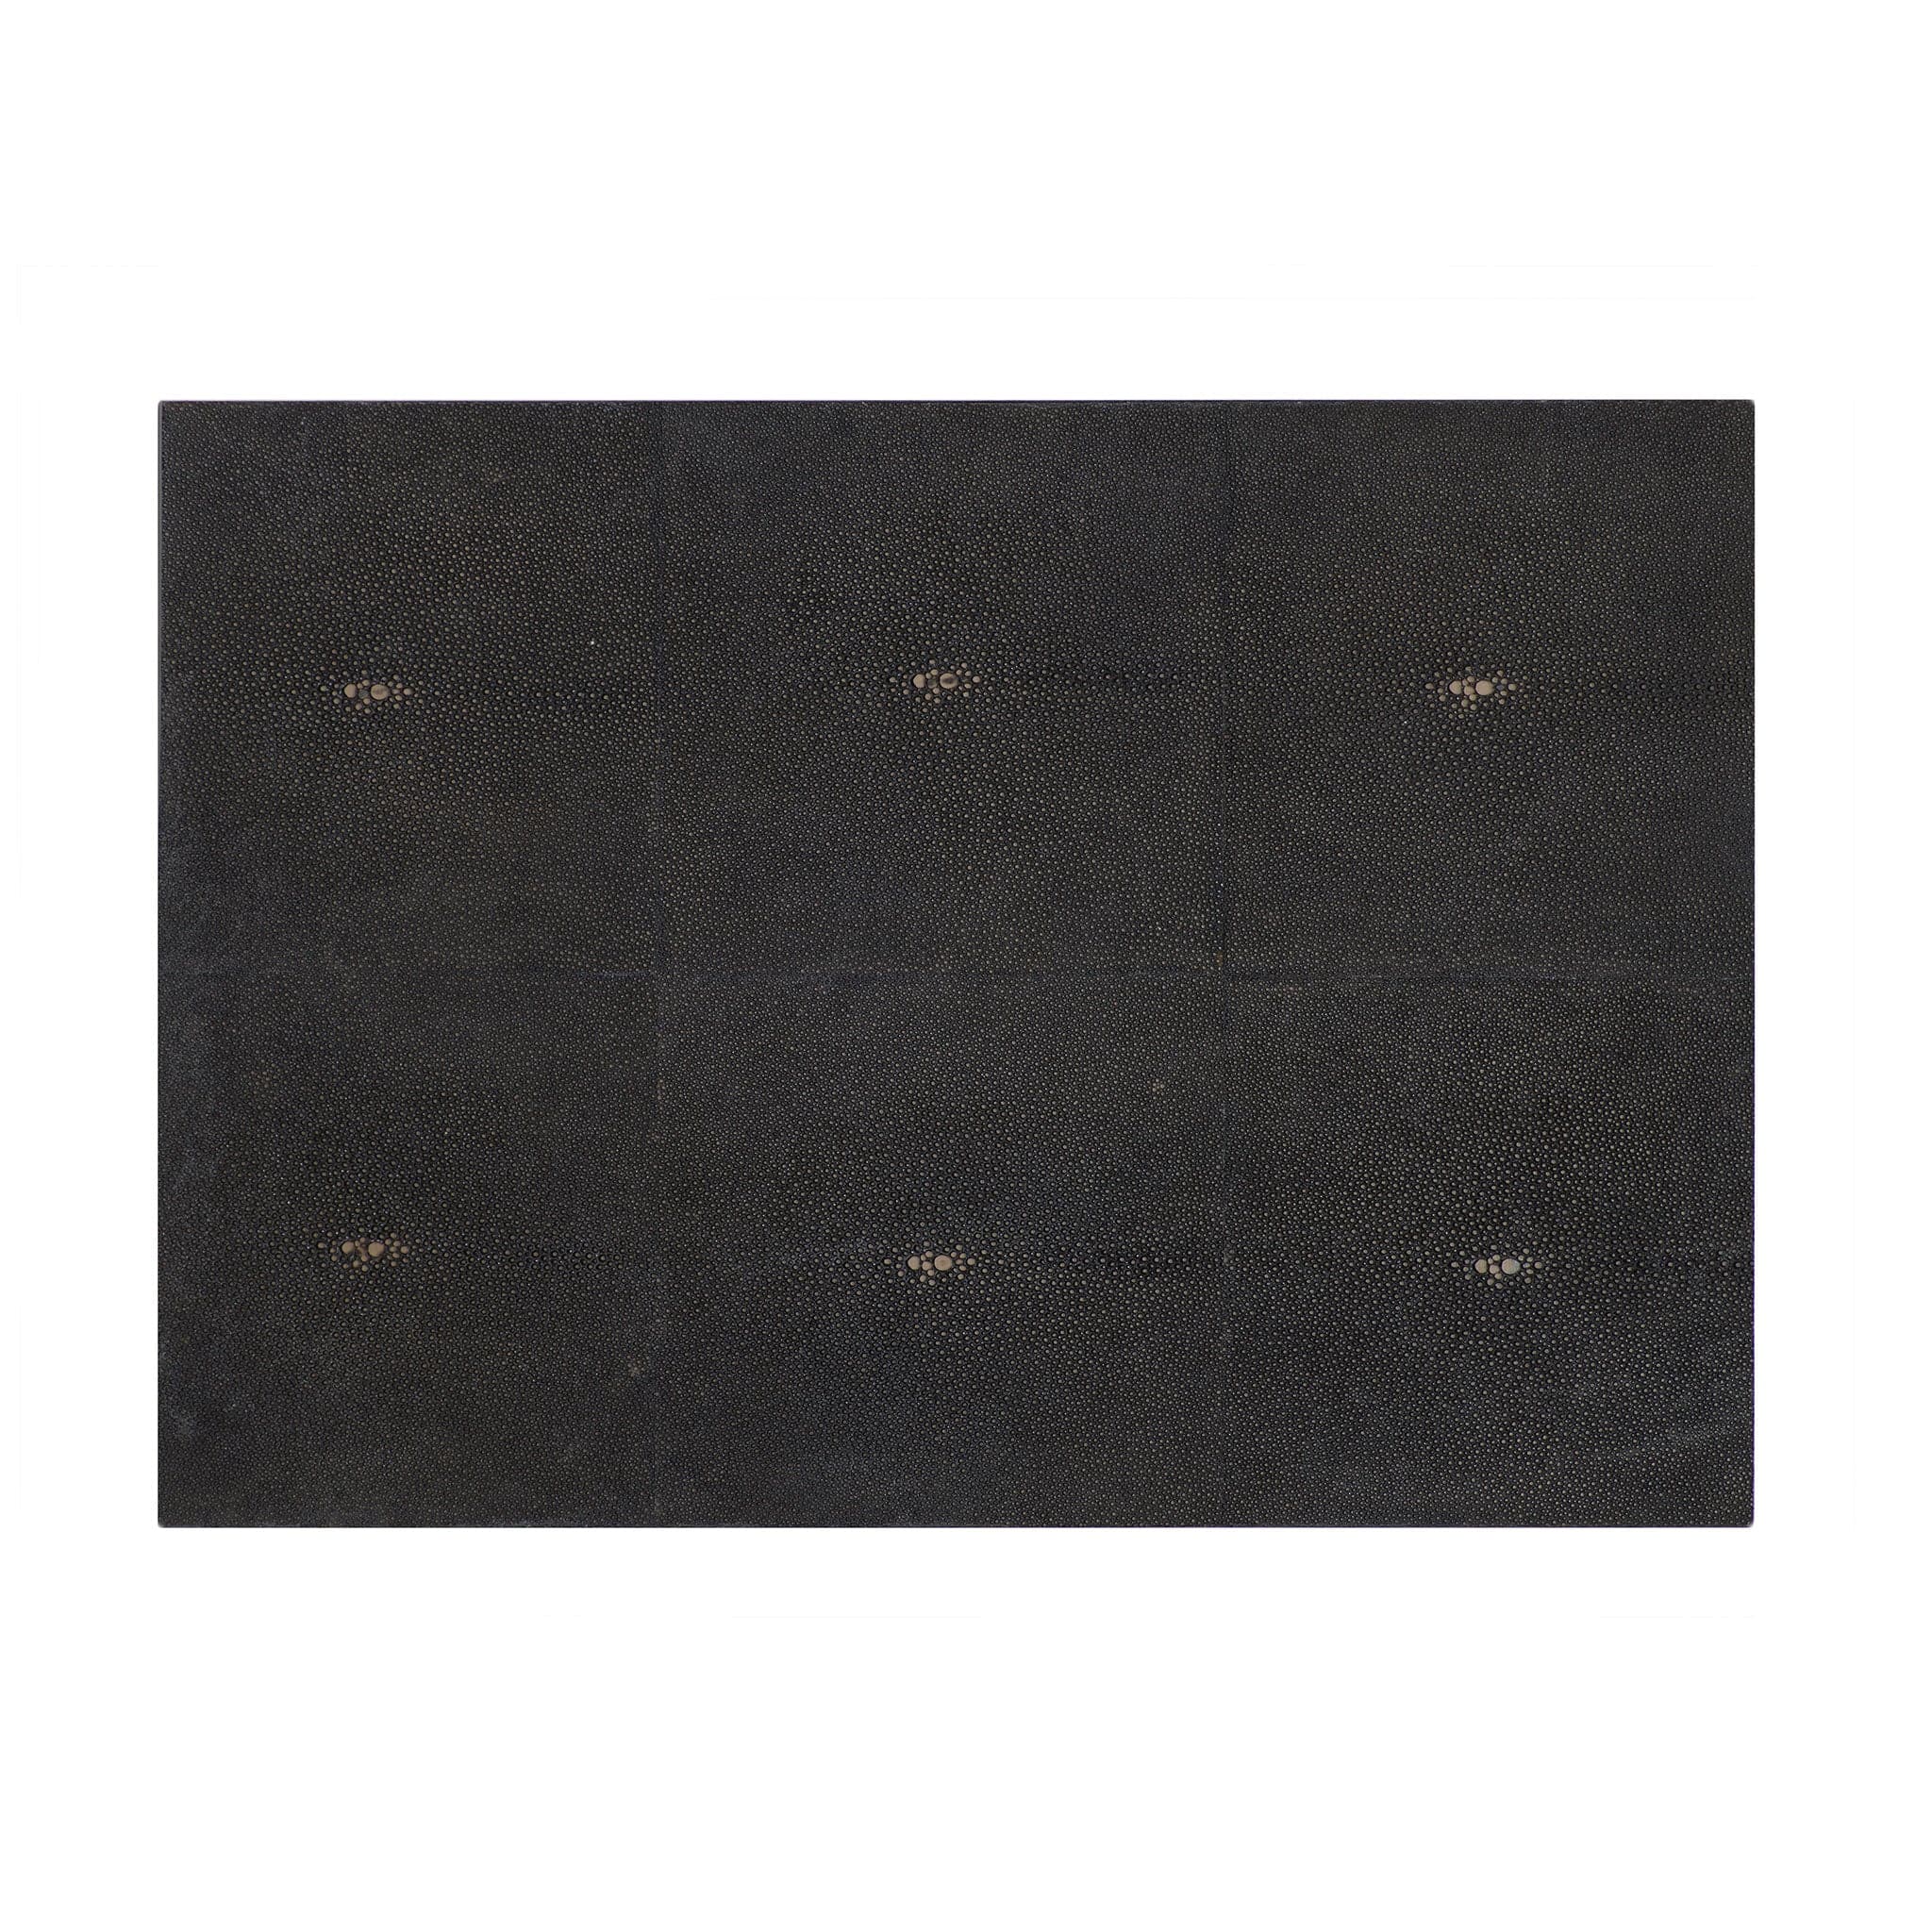 Serving Mat / Grand Placemat Faux Shagreen Chocolate - Posh Trading Company  - Interior furnishings london